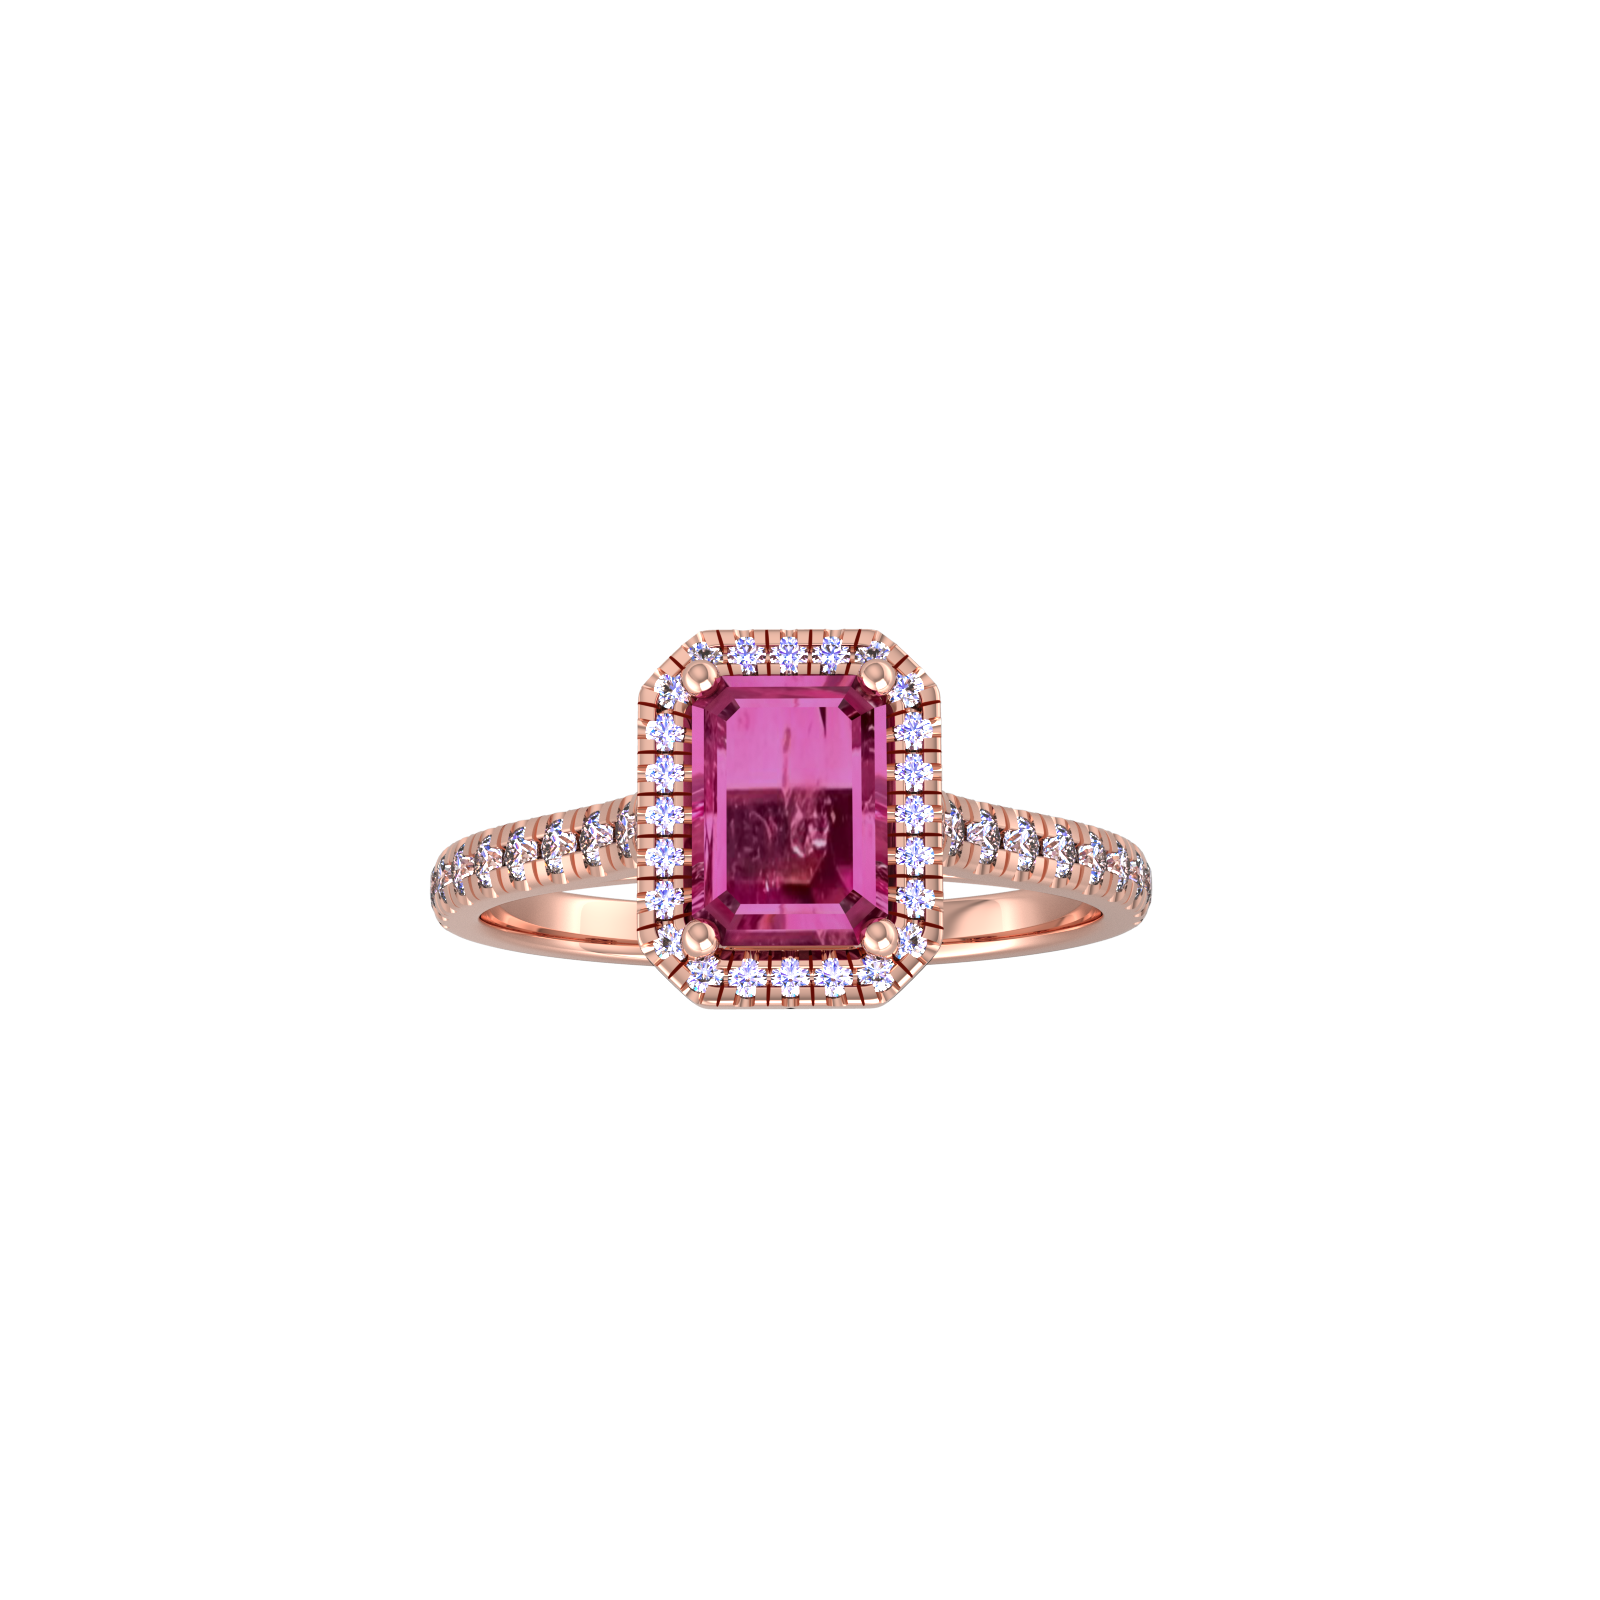 9ct Rose Gold Pink Tourmaline & Diamond Halo Ring with Diamond Shoulders - Ring Size E.5